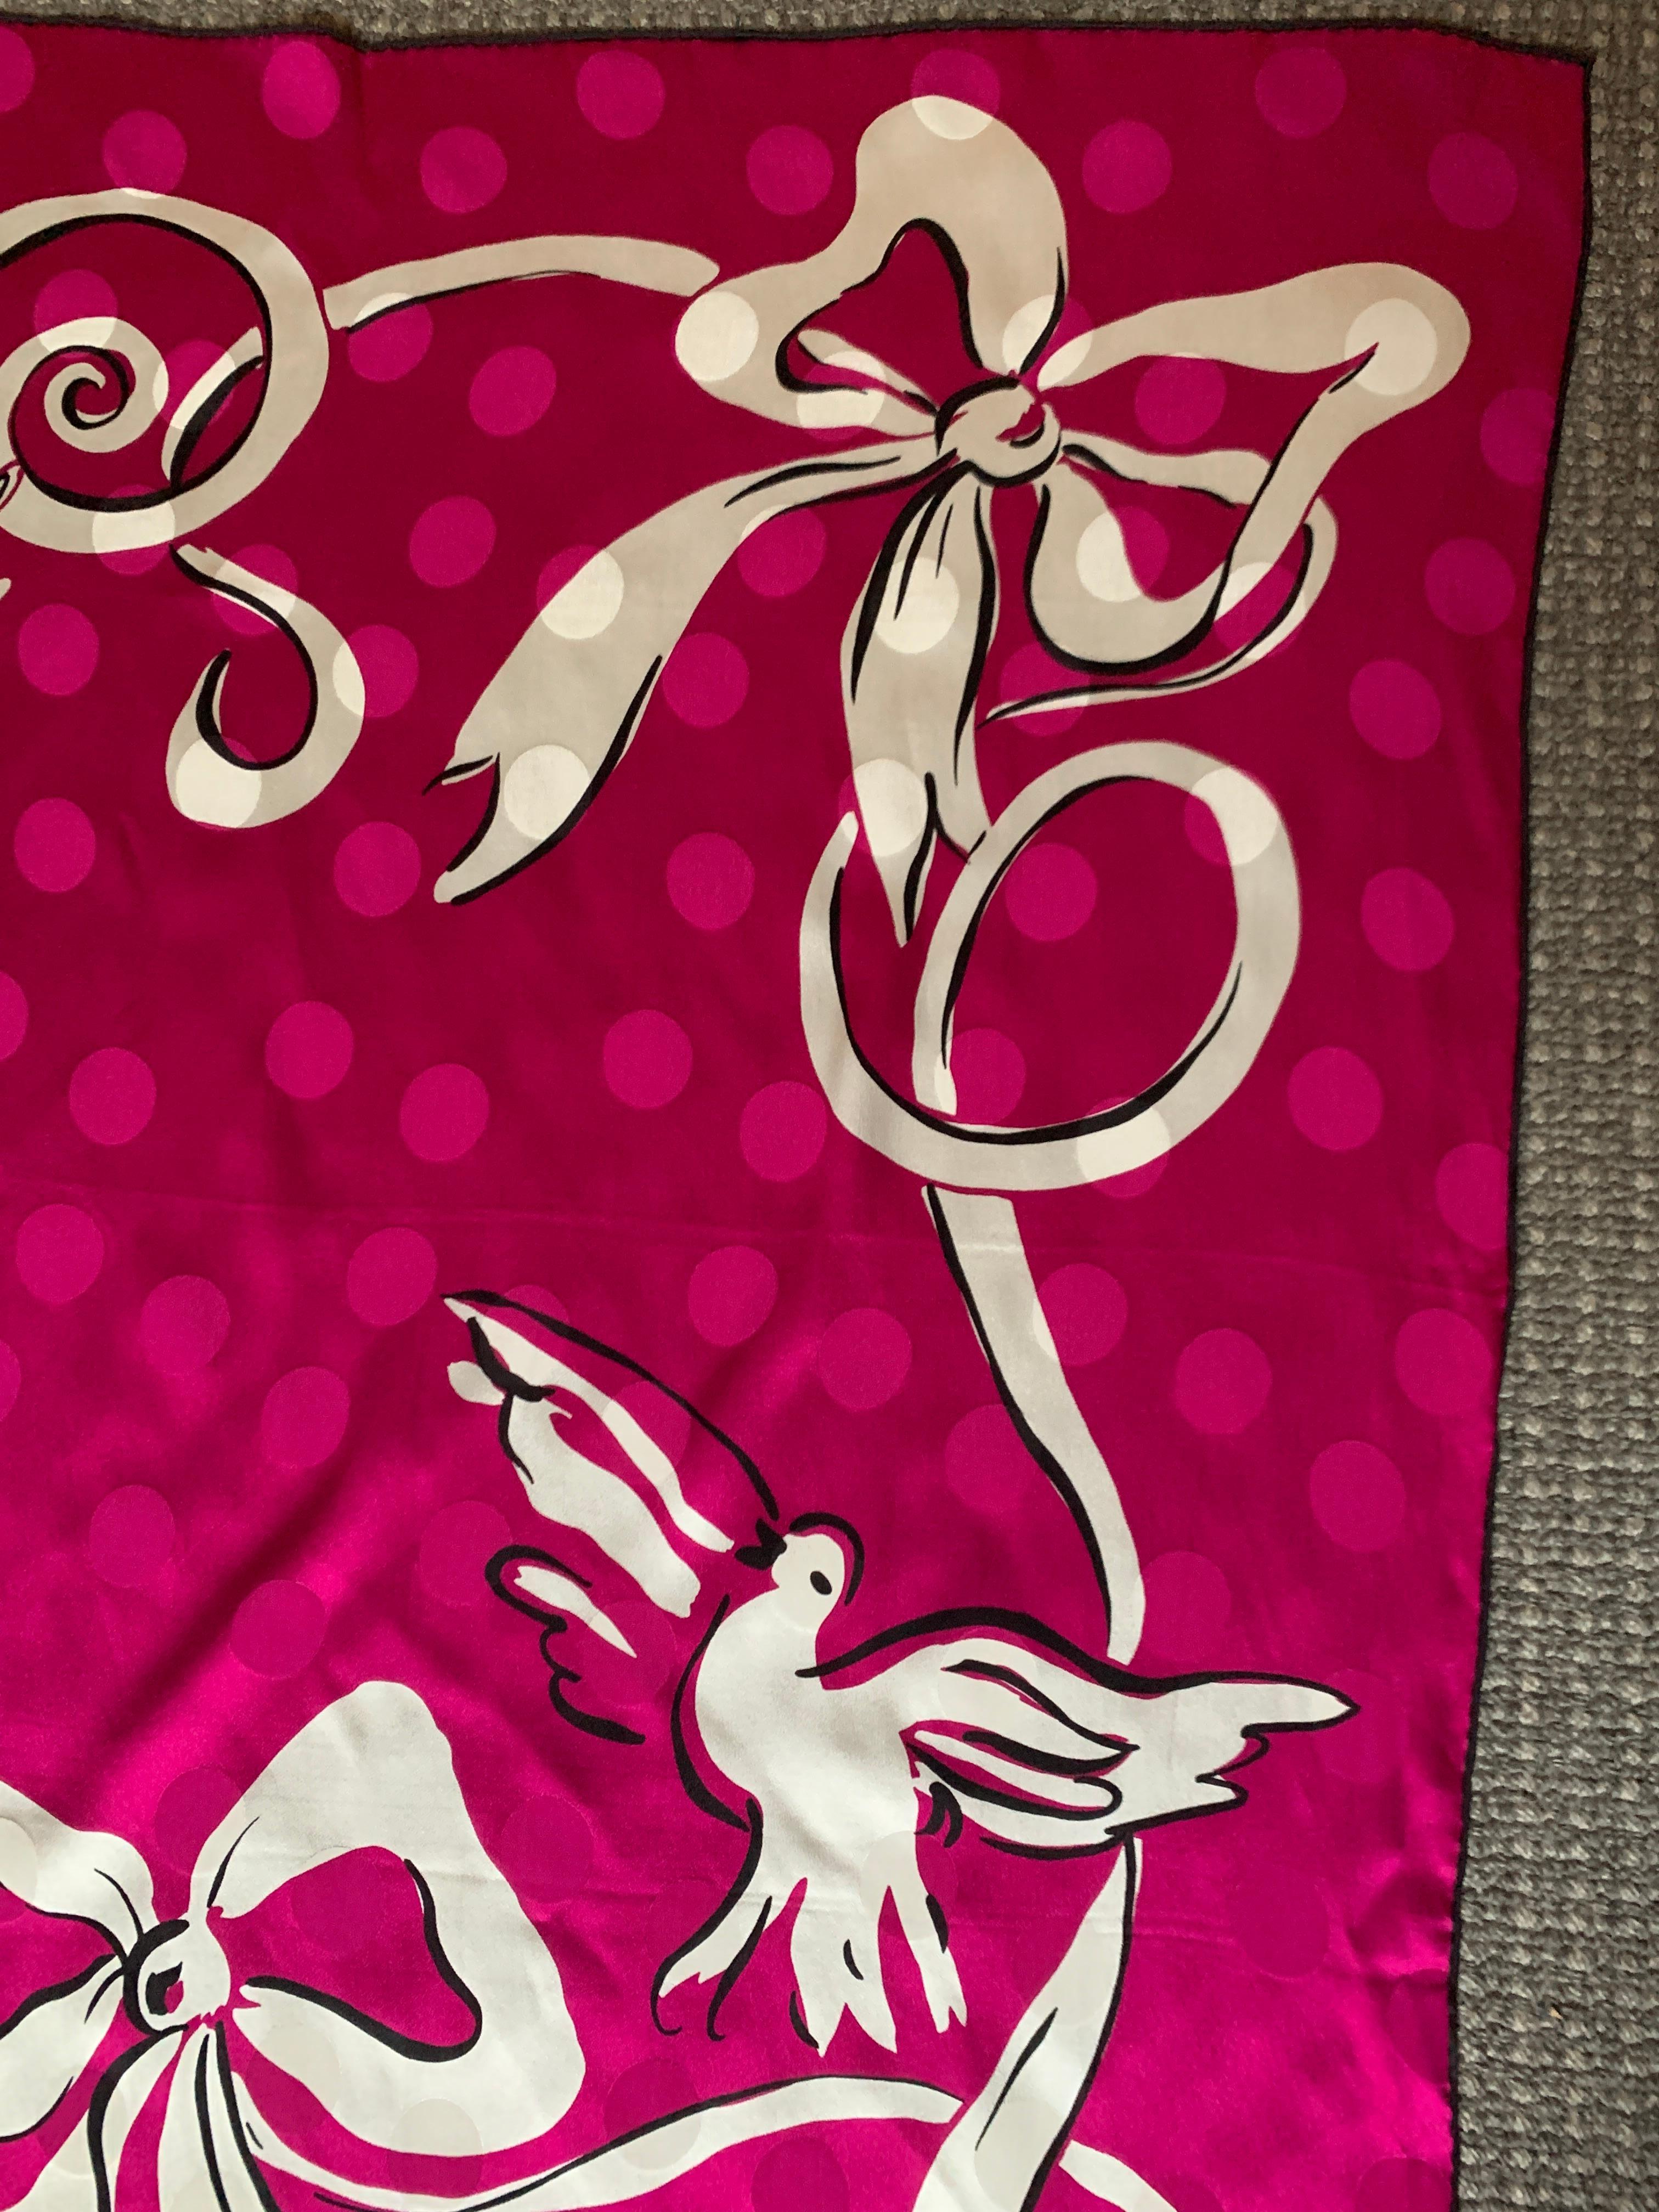 Yves Saint Laurent Vintage Silk Scarf in Fuchsia Pink Dove and Ribbon Print 1